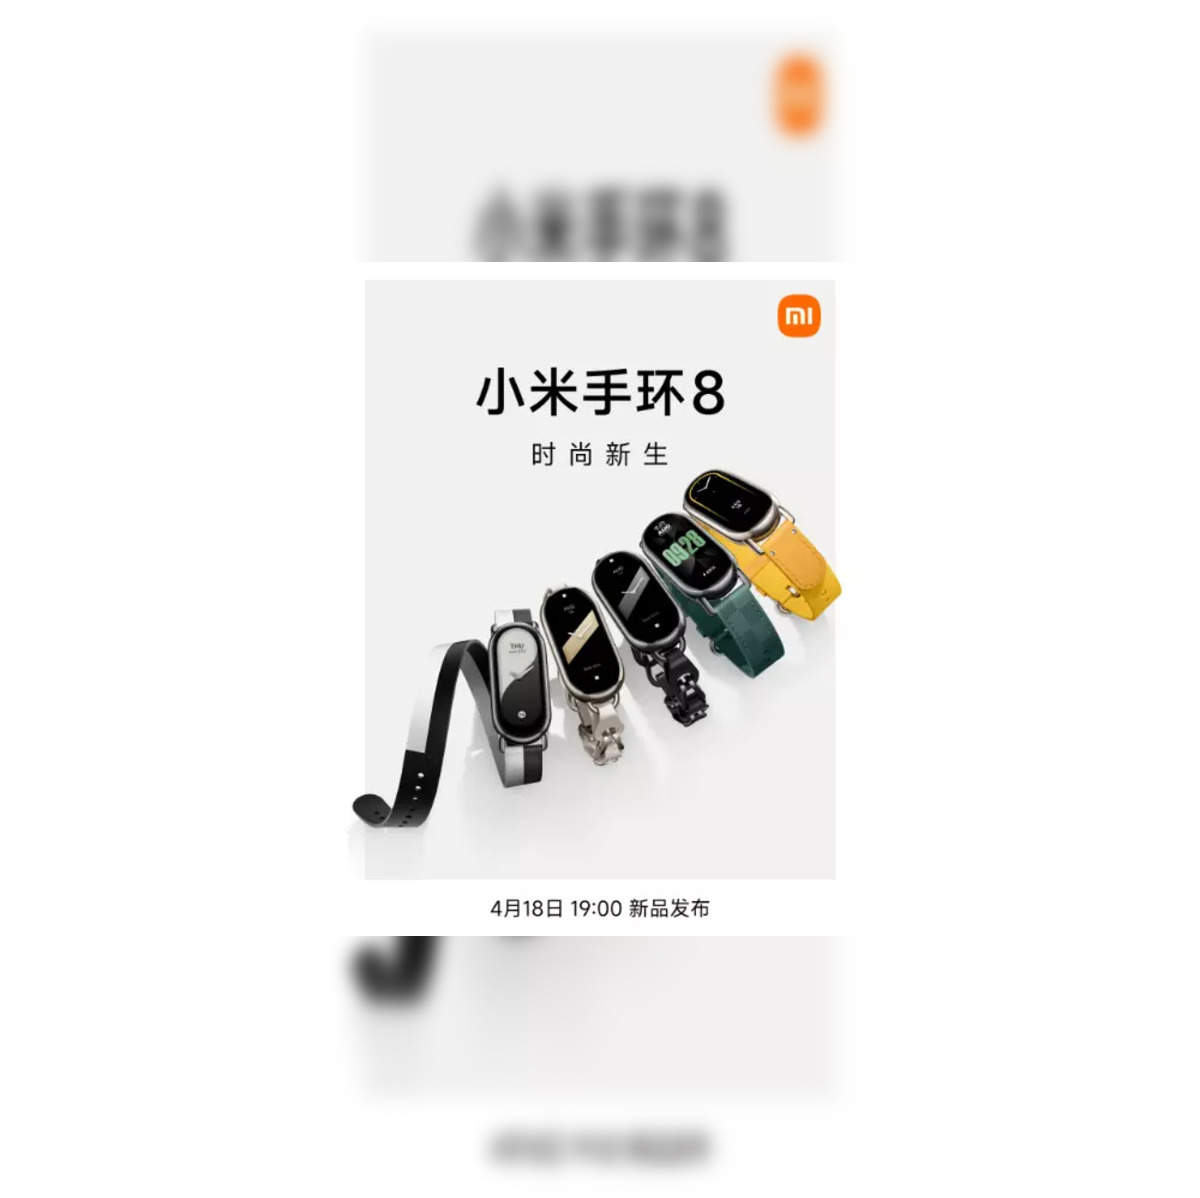 Mi Band 8 With 1.62-Inch AMOLED Display, Over 150 Training Modes